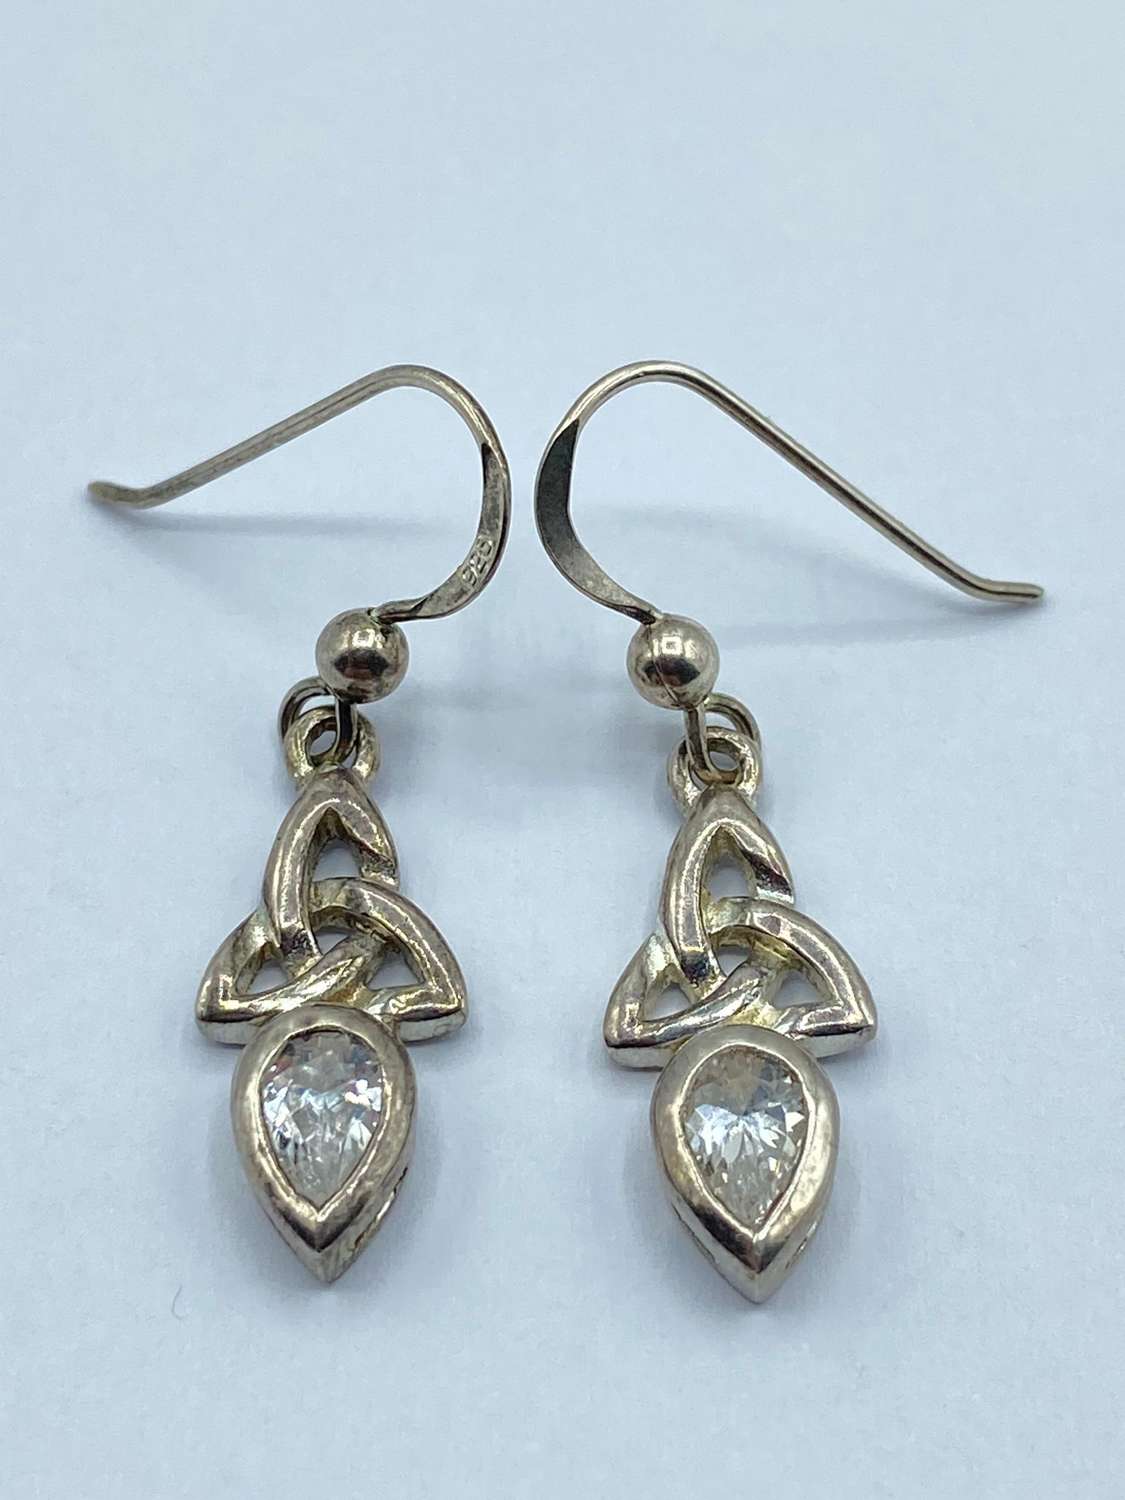 Vintage Silver Cubic Zirconia Scottish Celtic Knot Earrings Signed SG